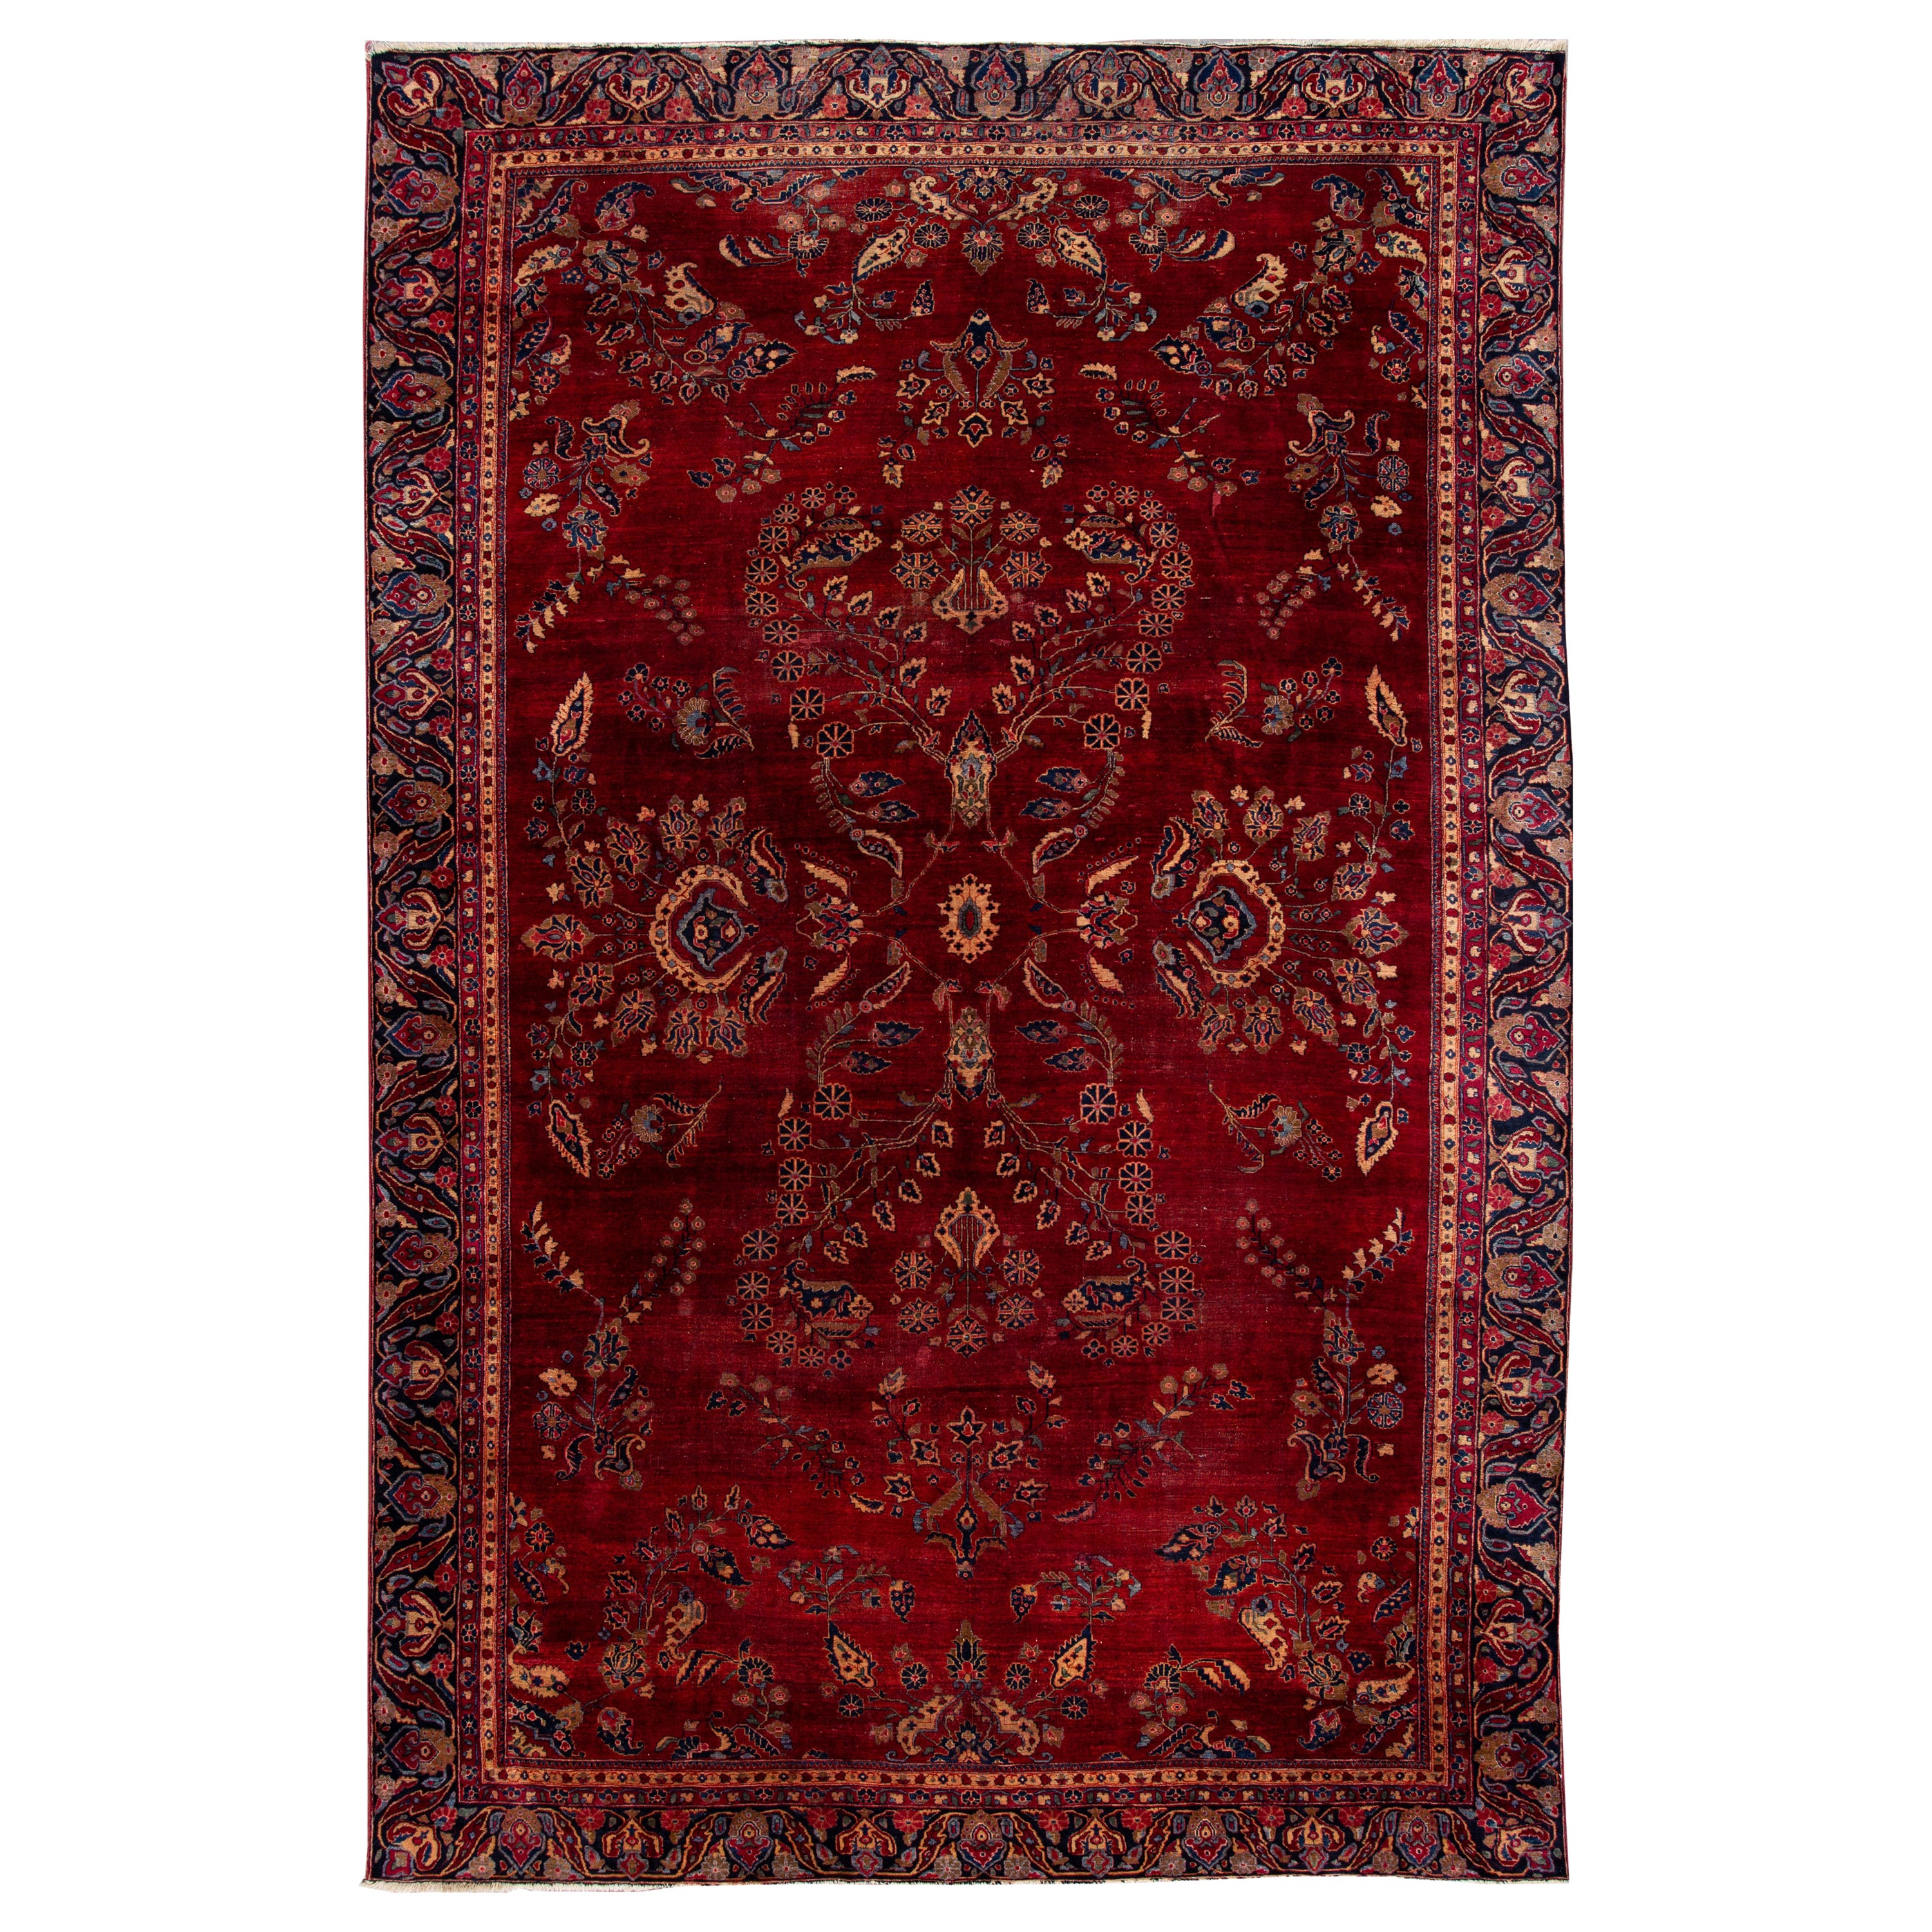 Red Antique Persian Sarouk Wool Rug Handmade with Classic Floral Design For Sale